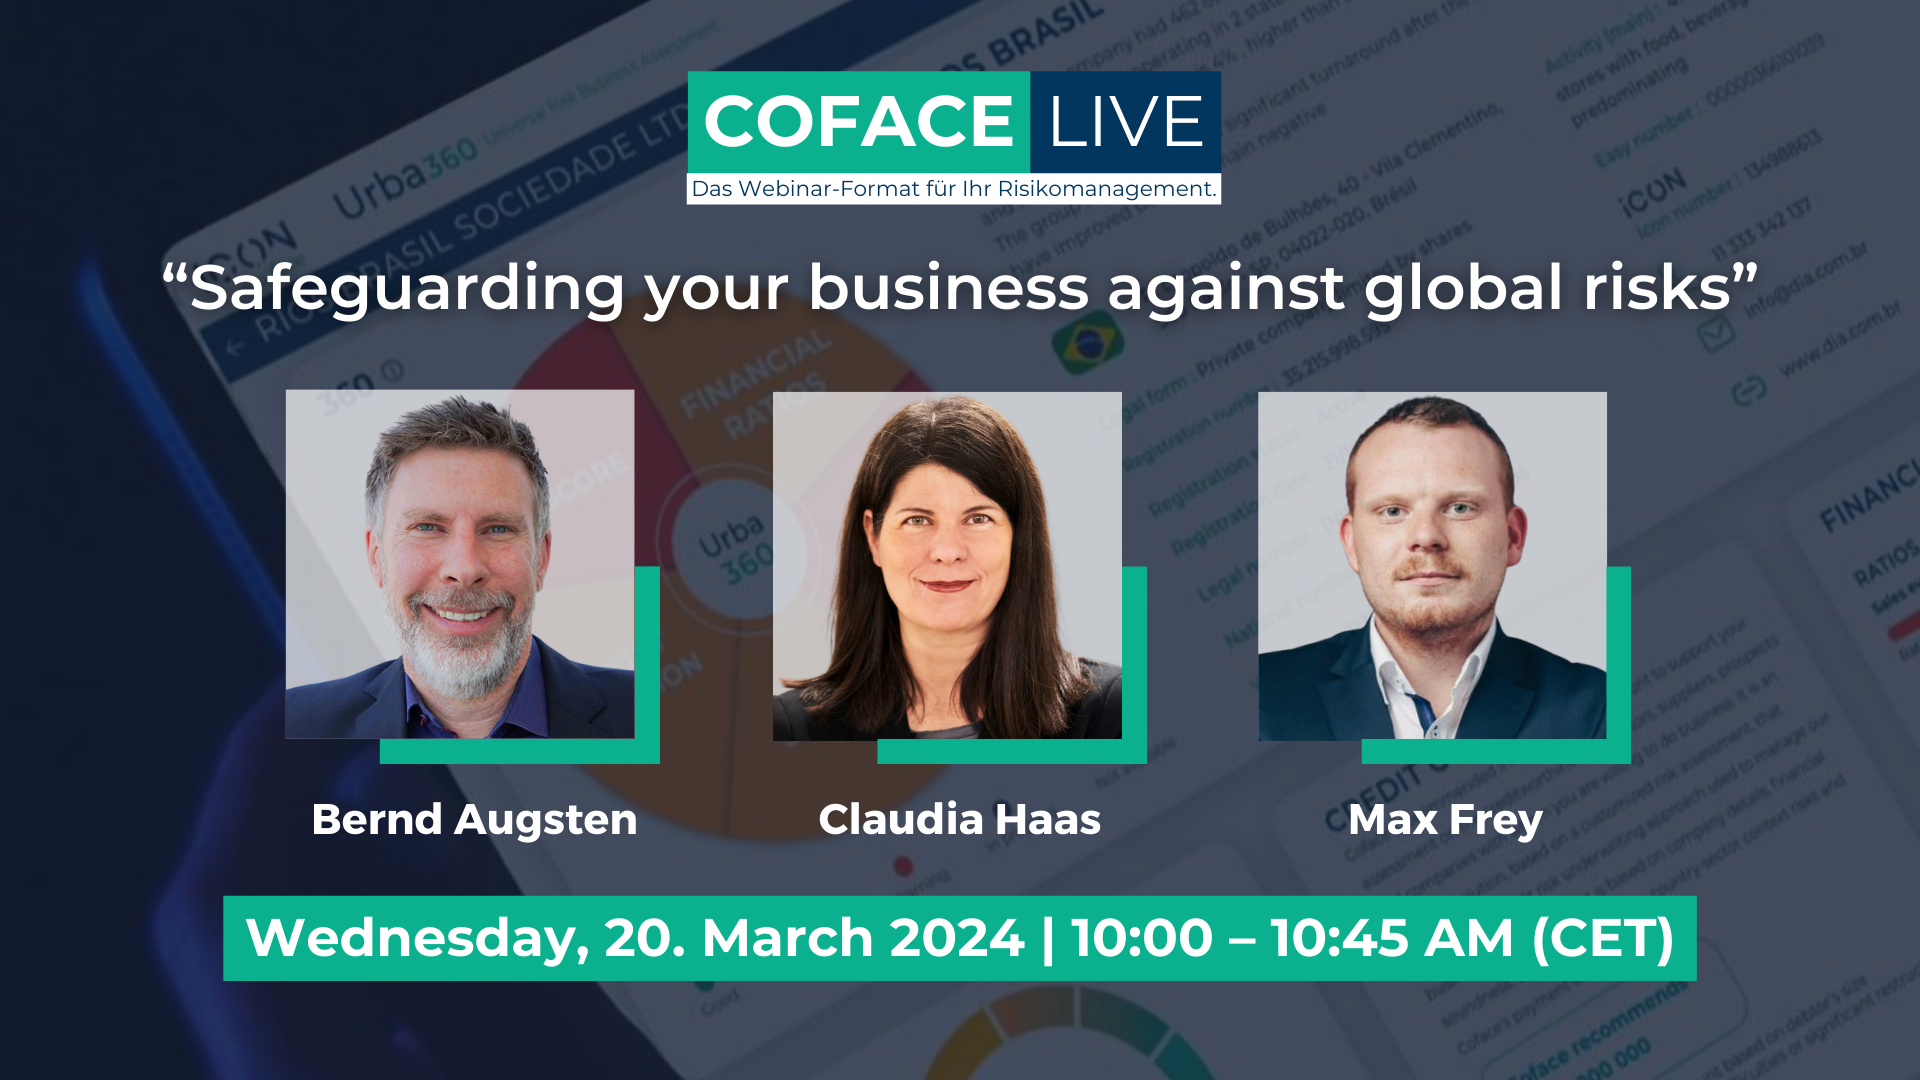 Coface Live: "Safeguarding your business against global risks", on Wednesday 20 Marc 2024 from 10:00 to 10:45 AM (CET). With the presence of Bernd Augsten, Claudia Haas and Max Frey.